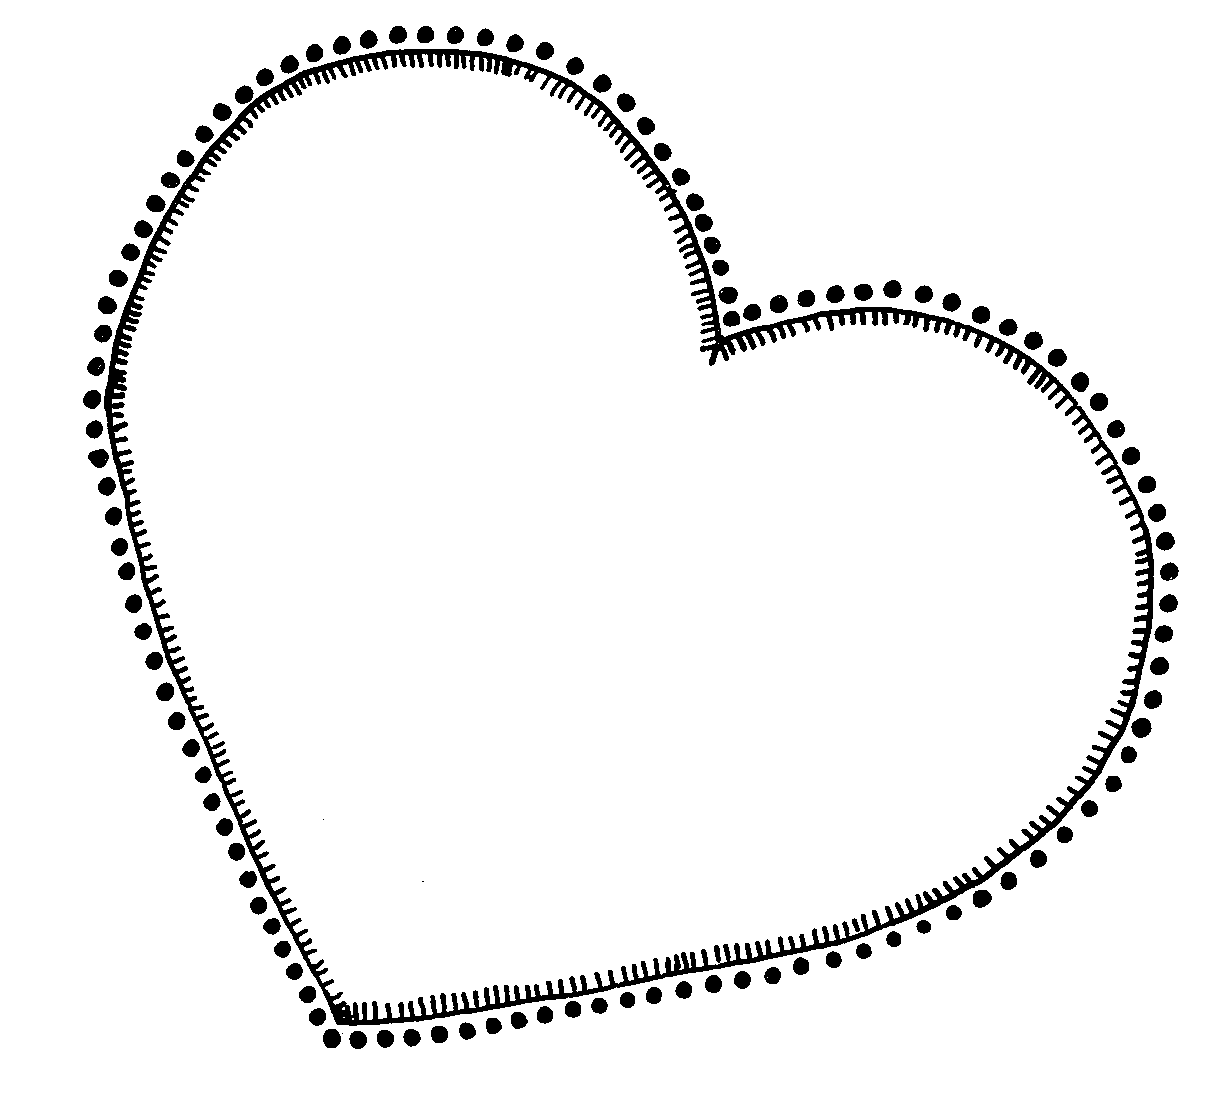 Free Black And White Heart Images, Download Free Clip Art